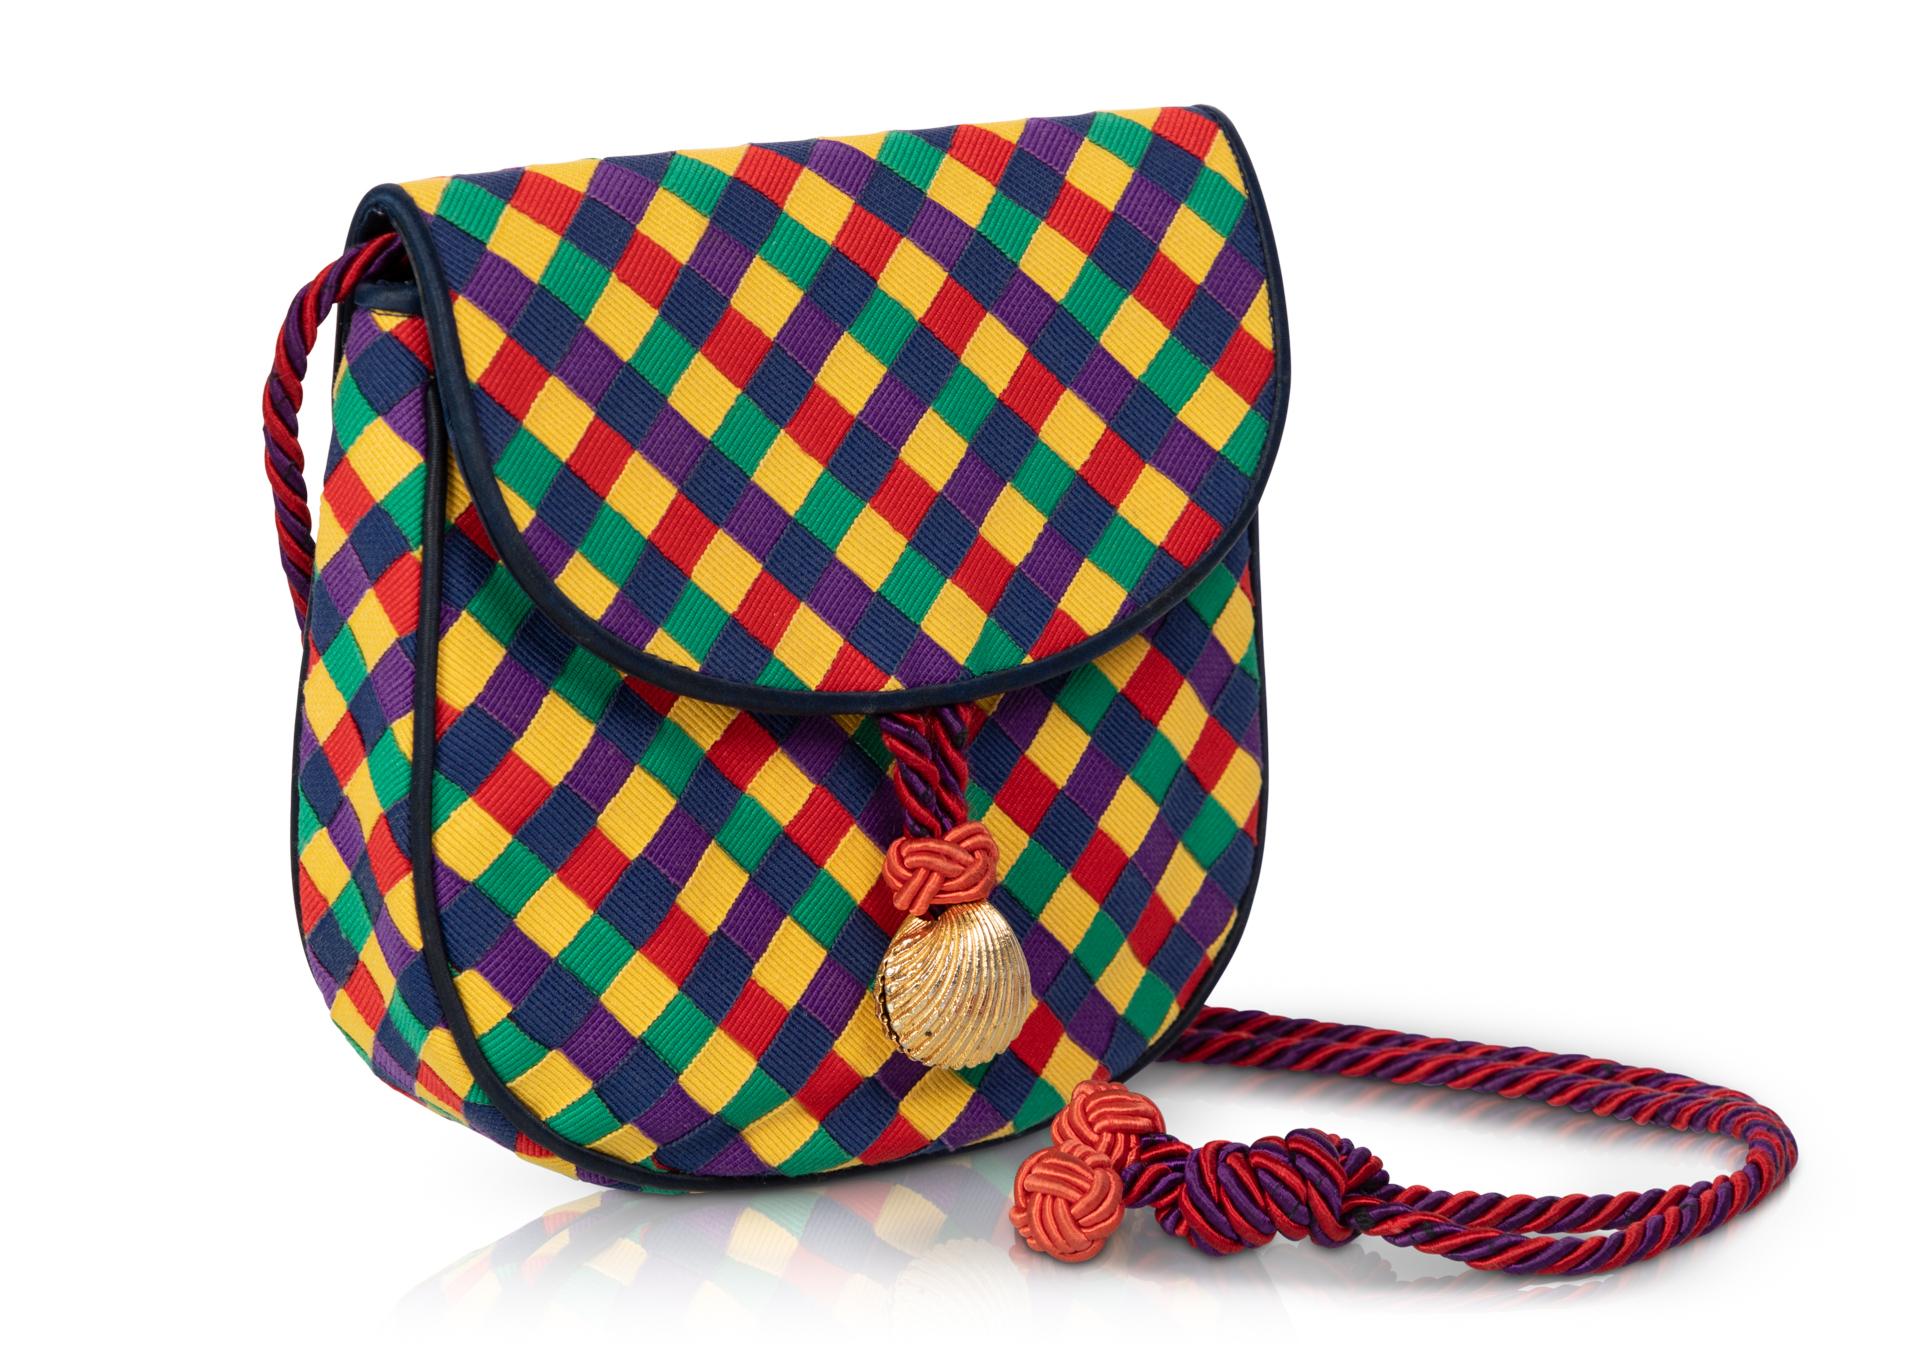 Known for producing high-quality leather goods, this bag is a departure from the Bottega Veneta traditional style. Maintaining the brand’s iconic weave, this purse is crafted entirely of grosgrain ribbons of red, navy, green, yellow, and purple that